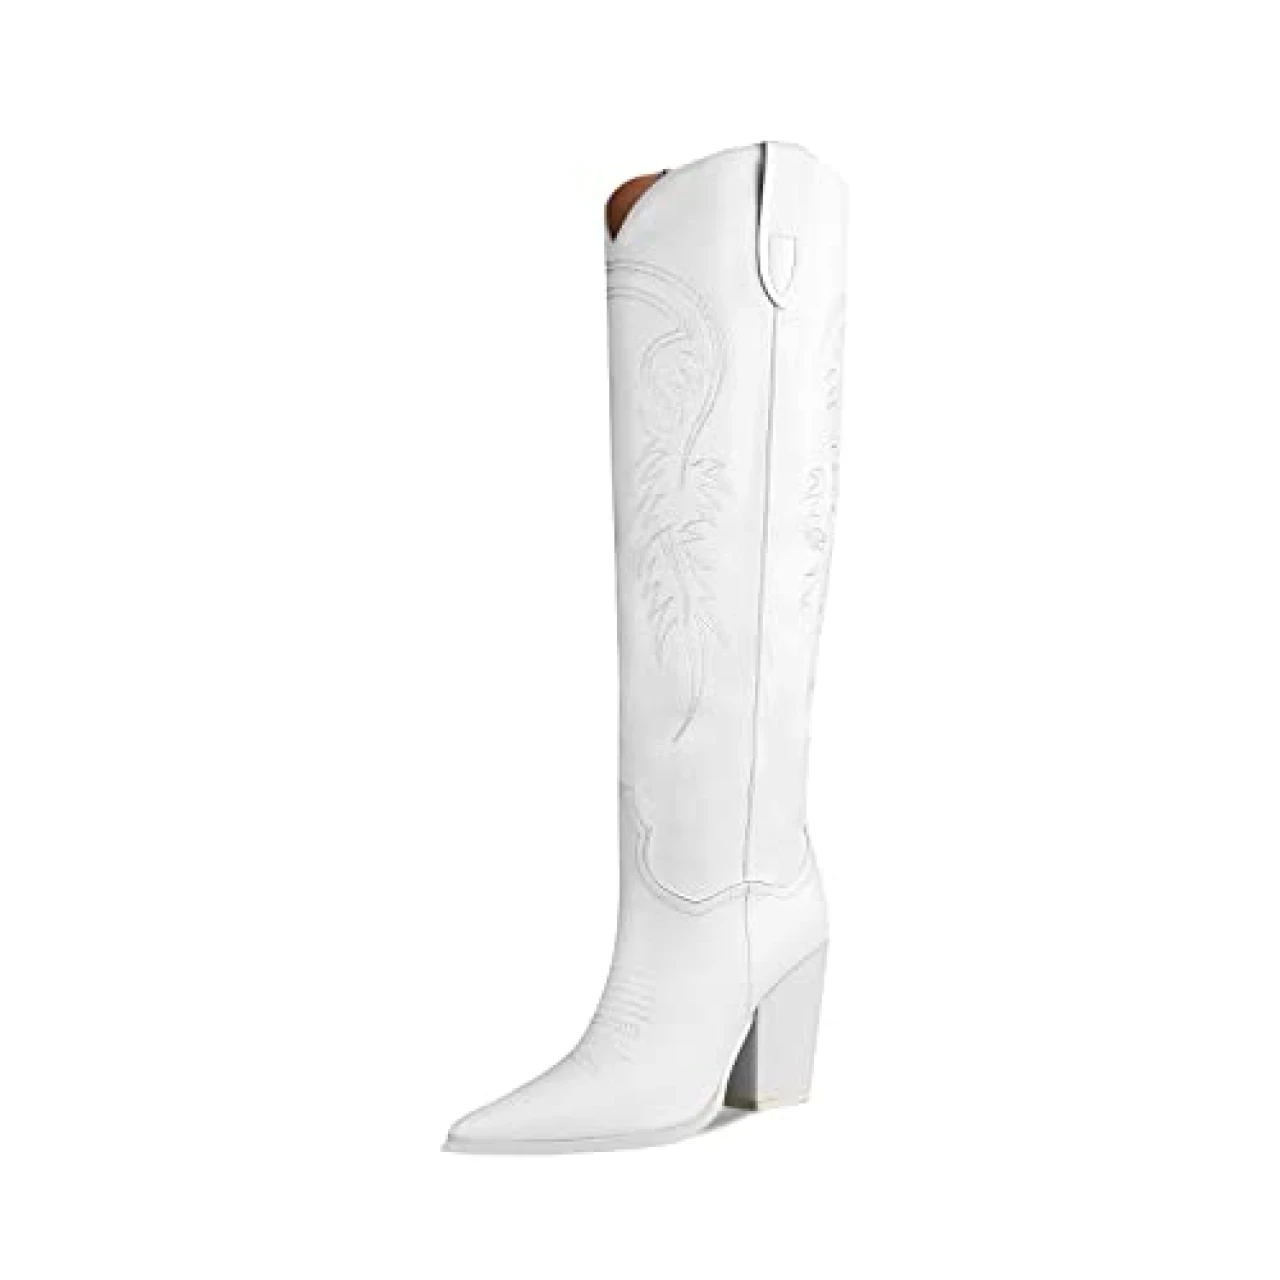 ISNOM White Cowboy Cowgirl Boots for Women, Embroidered Western Cowboy Boots Tall Knee High Boots Chunky Block Heel Pointed Toes Slip on Boots